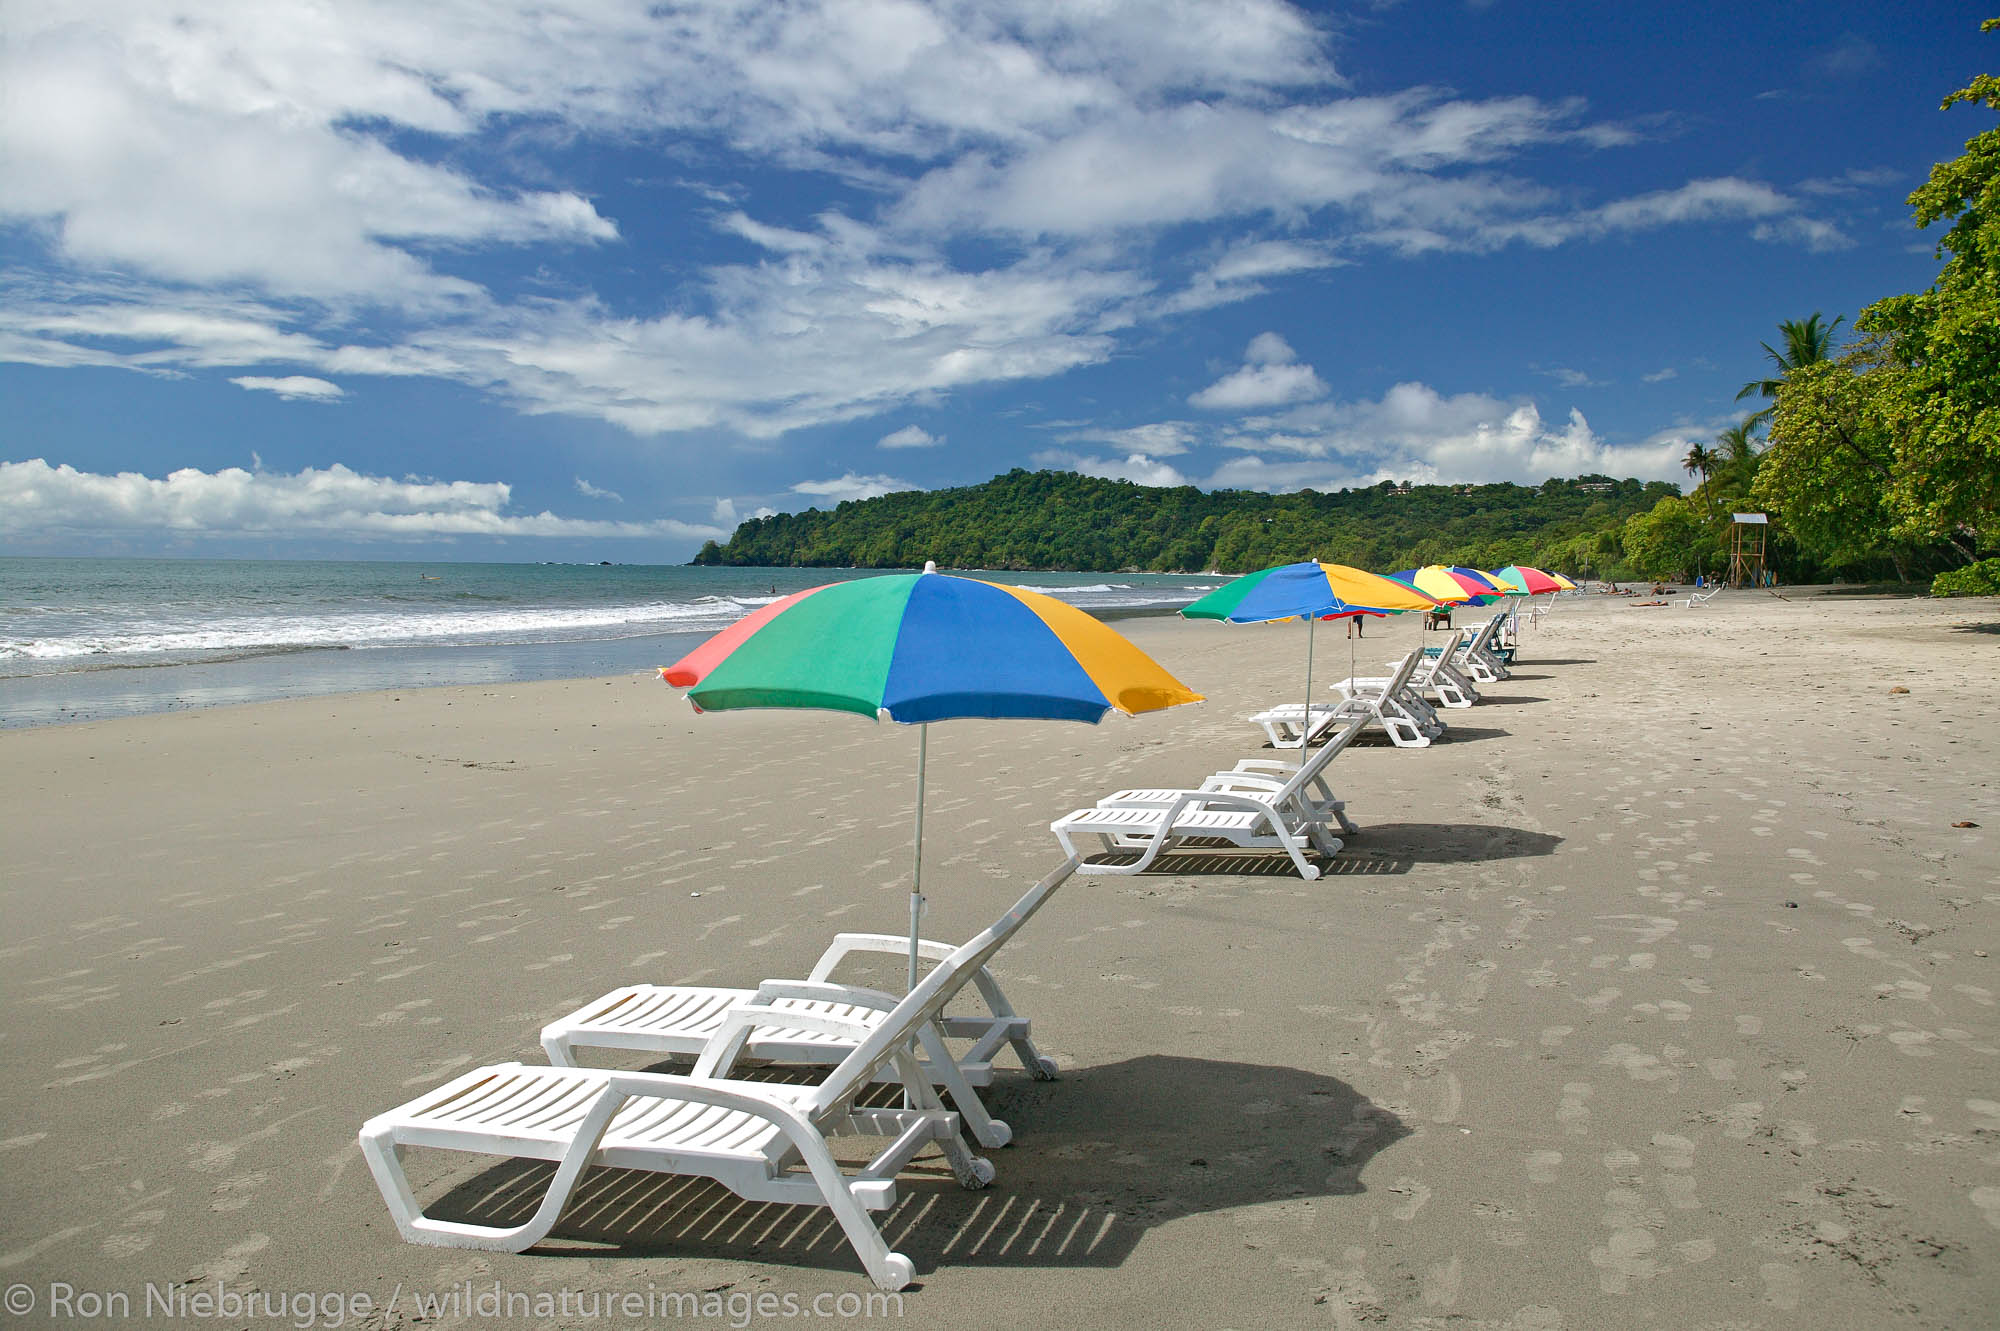 The First Beach and the Pacific Ocean at Manuel Antonio, Costa Rica.